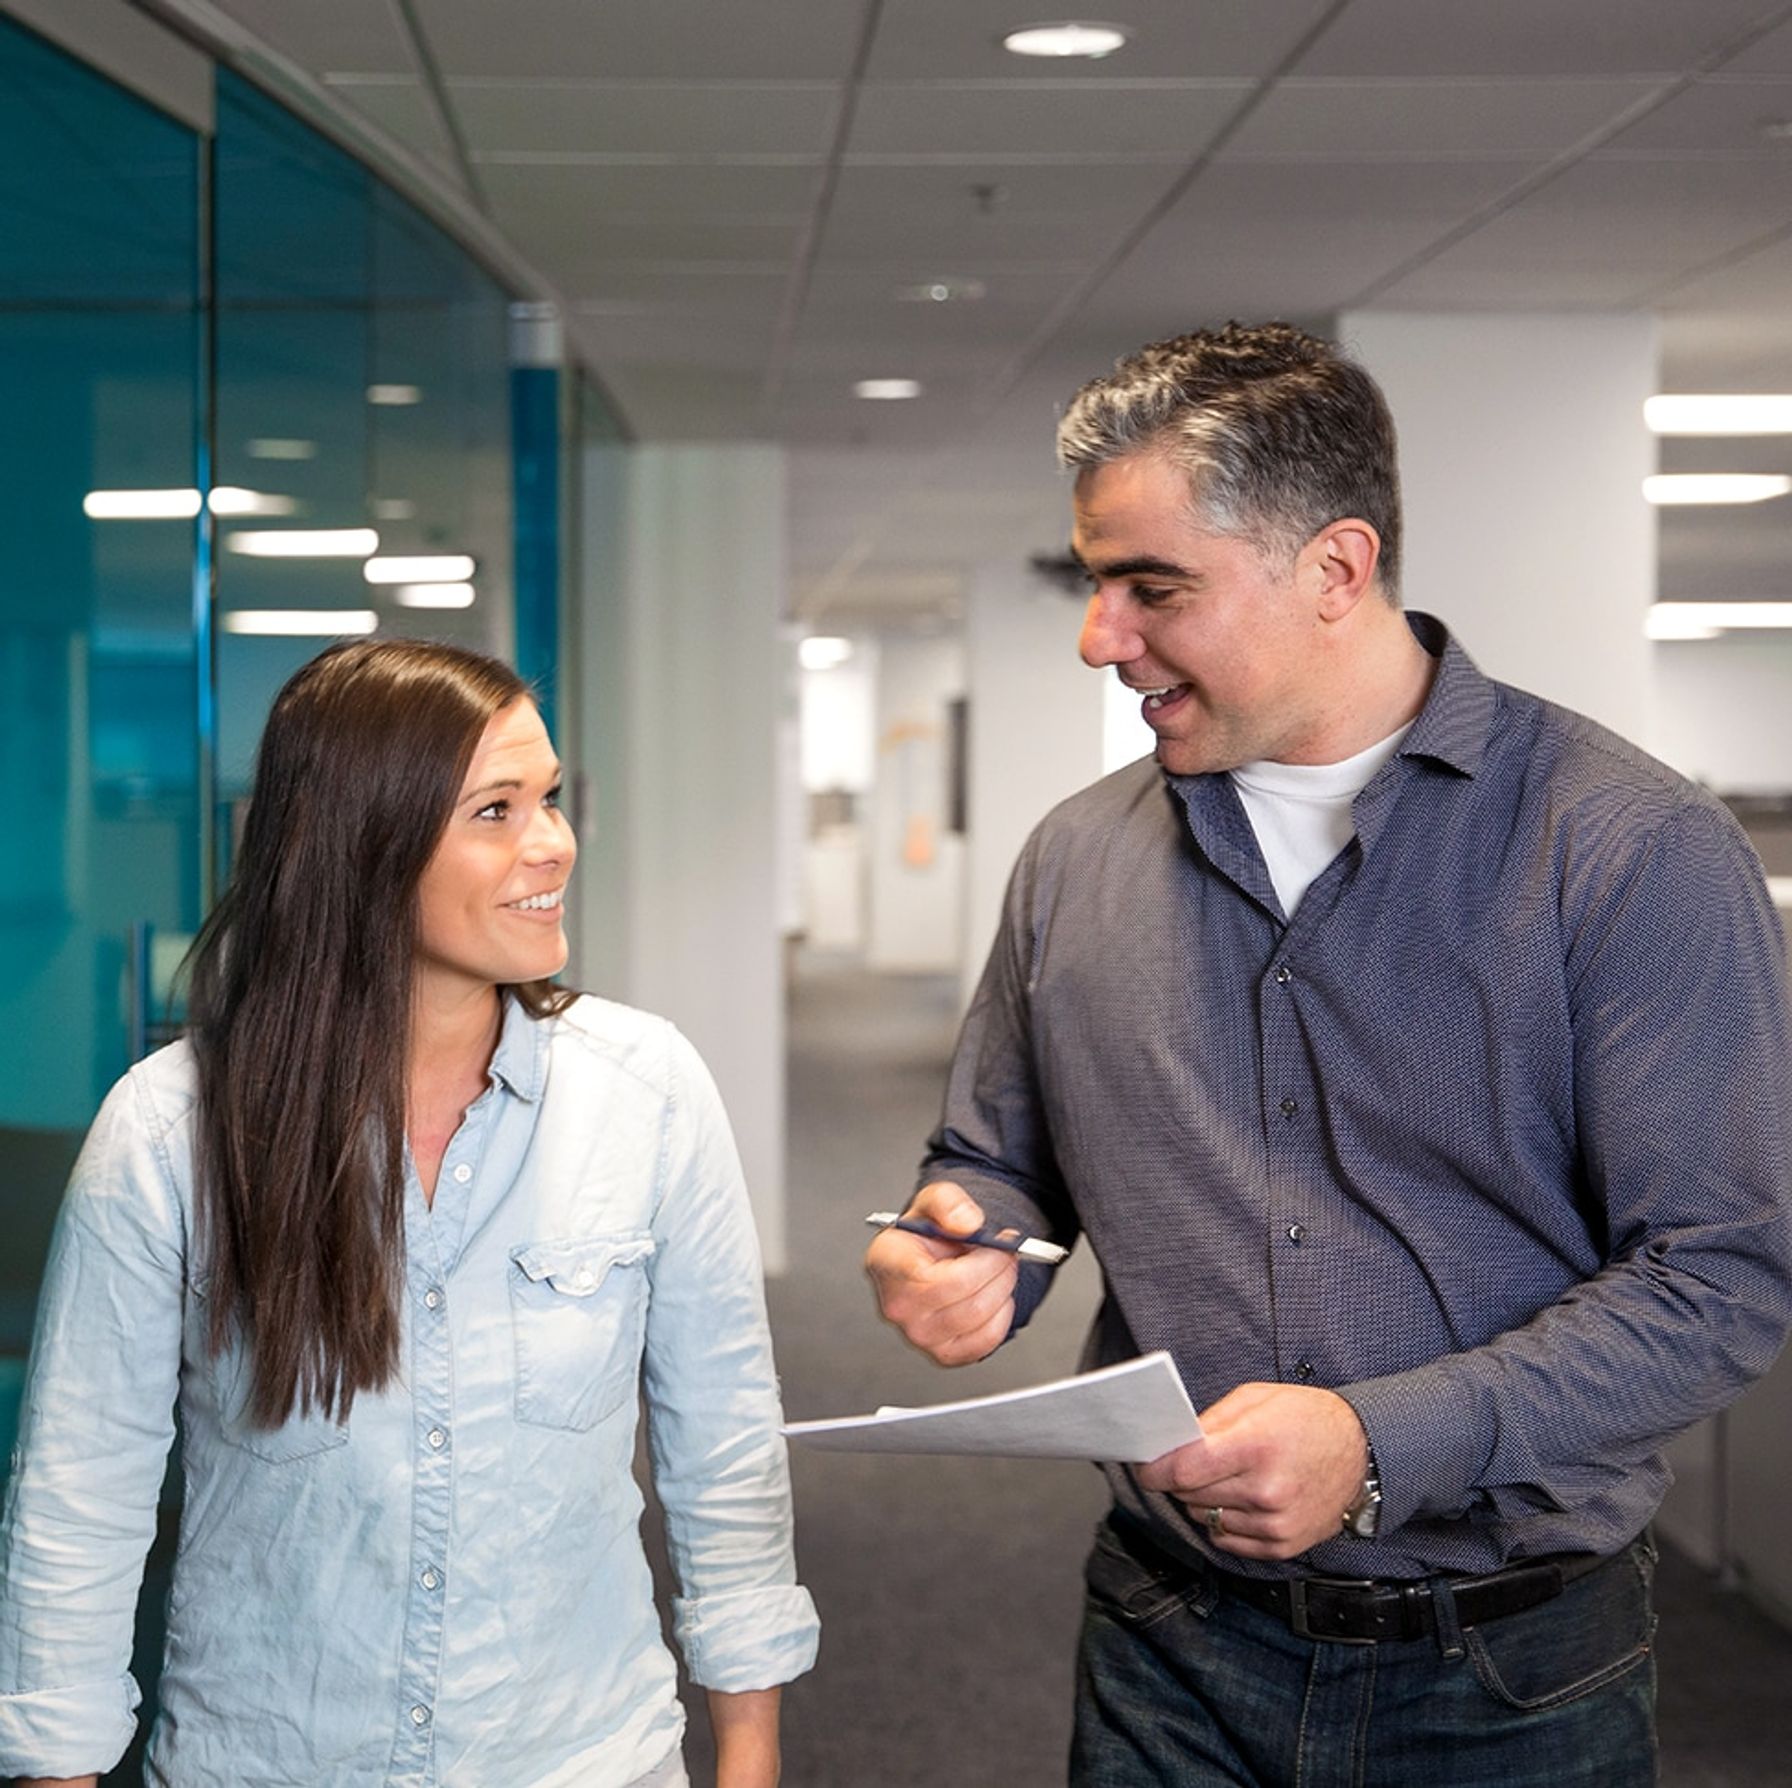 Male boss talking to a woman employee: both smiling